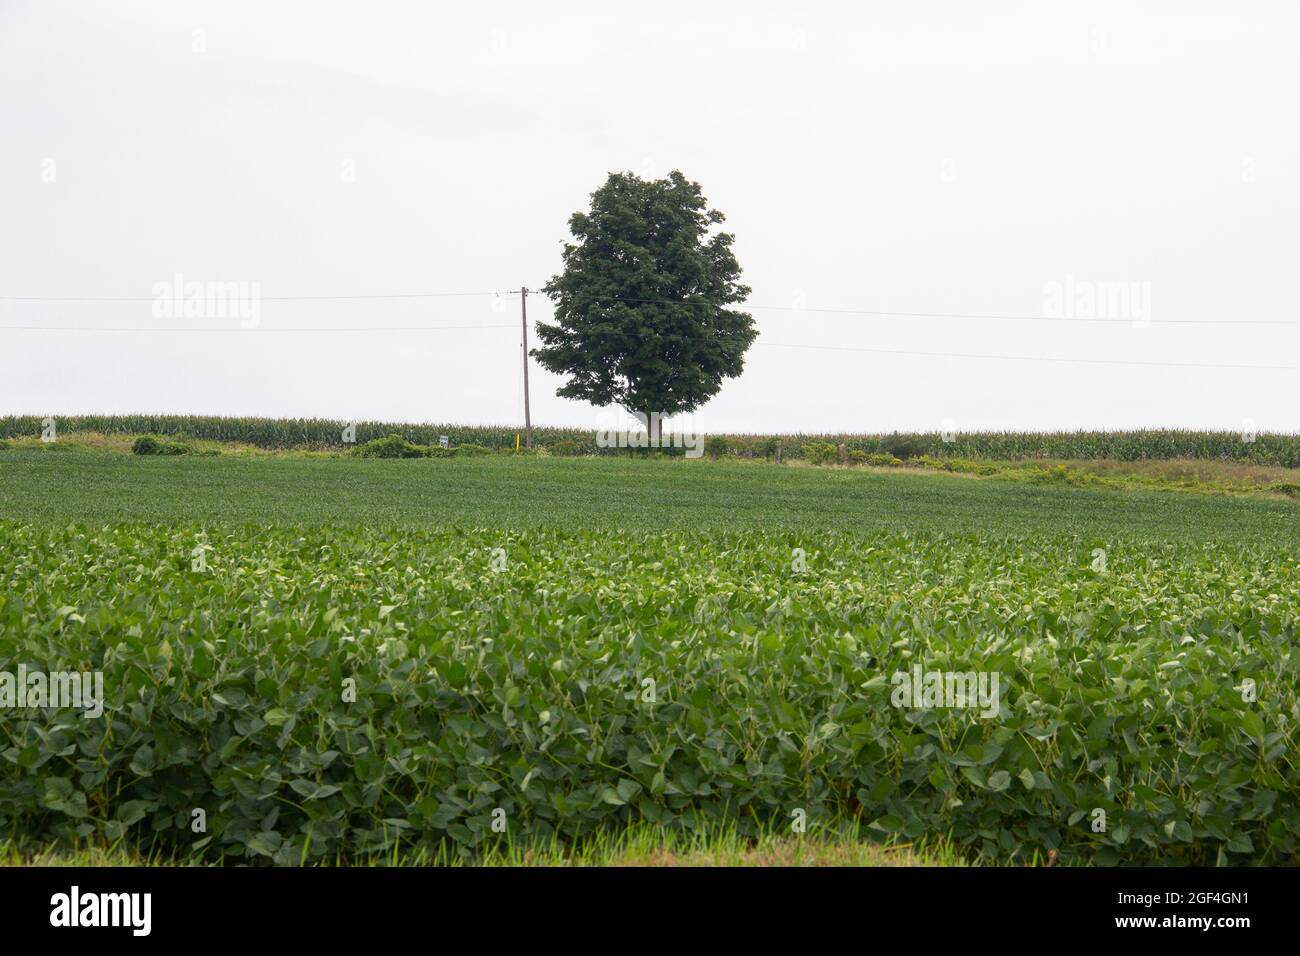 Large tree in the middle of a field Stock Photo